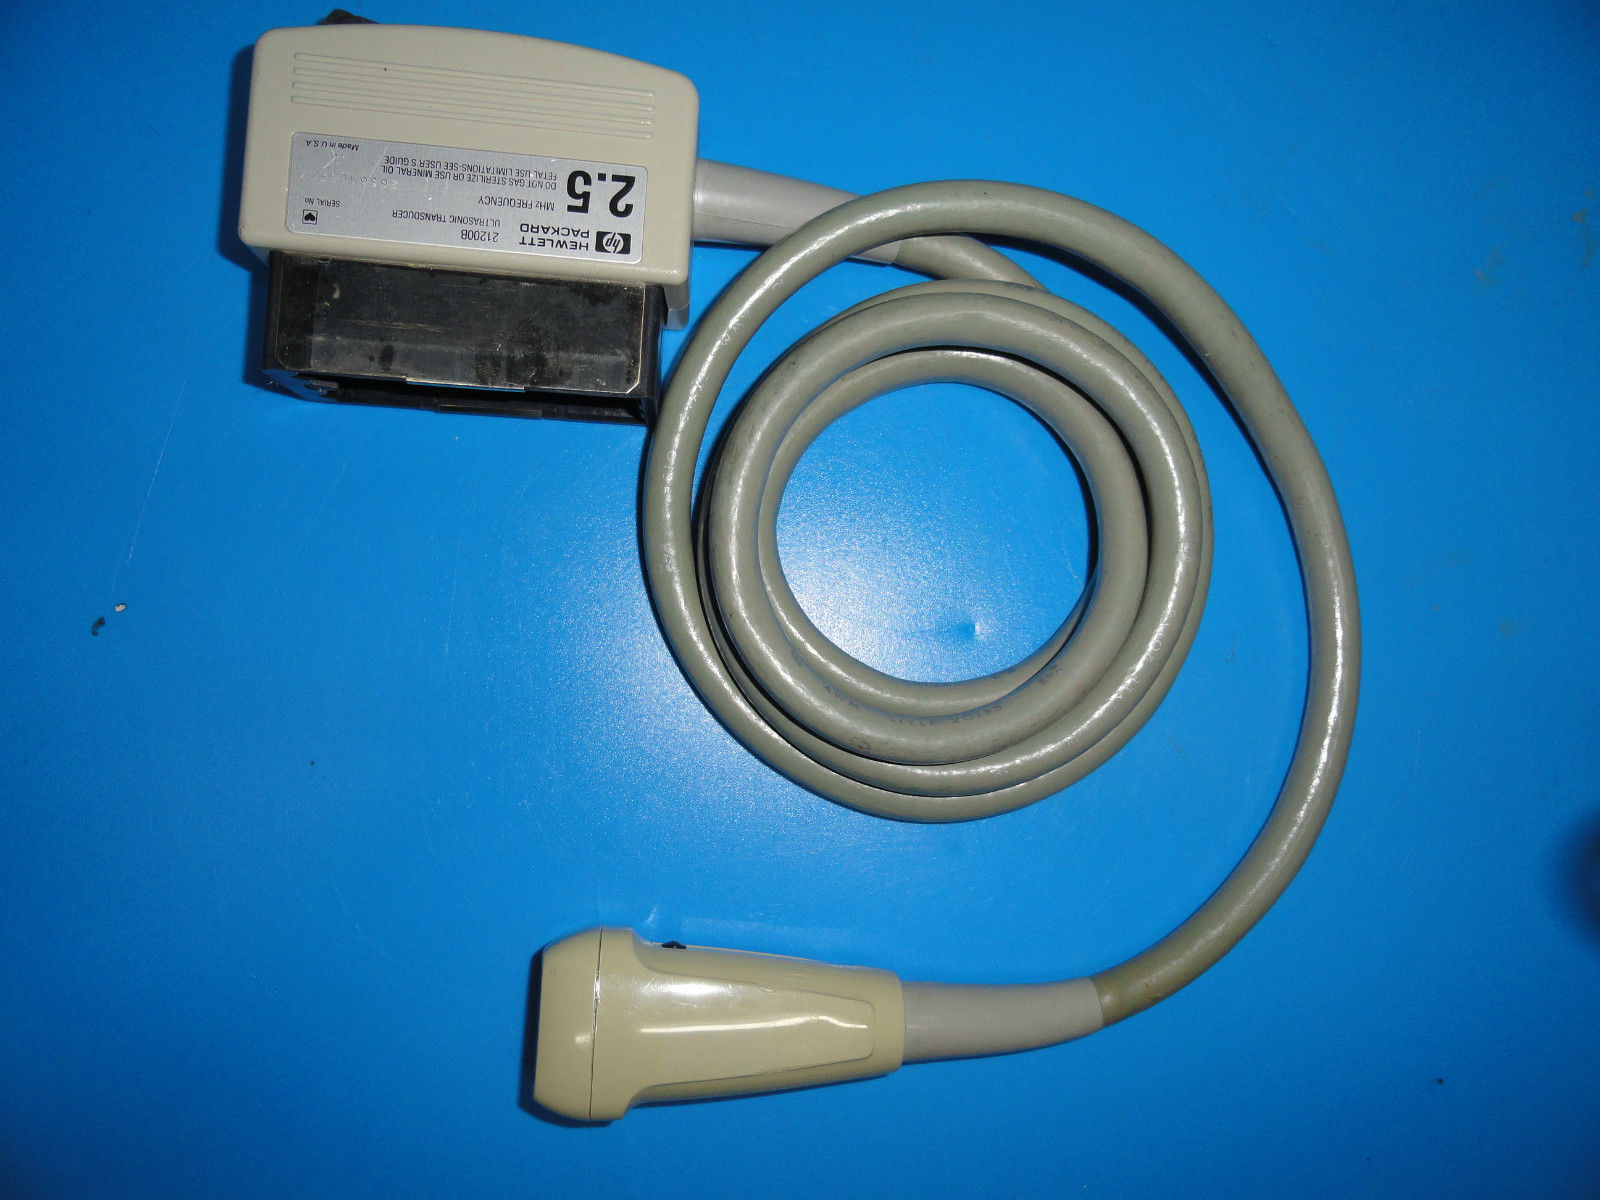 a white cord connected to a device on a blue surface